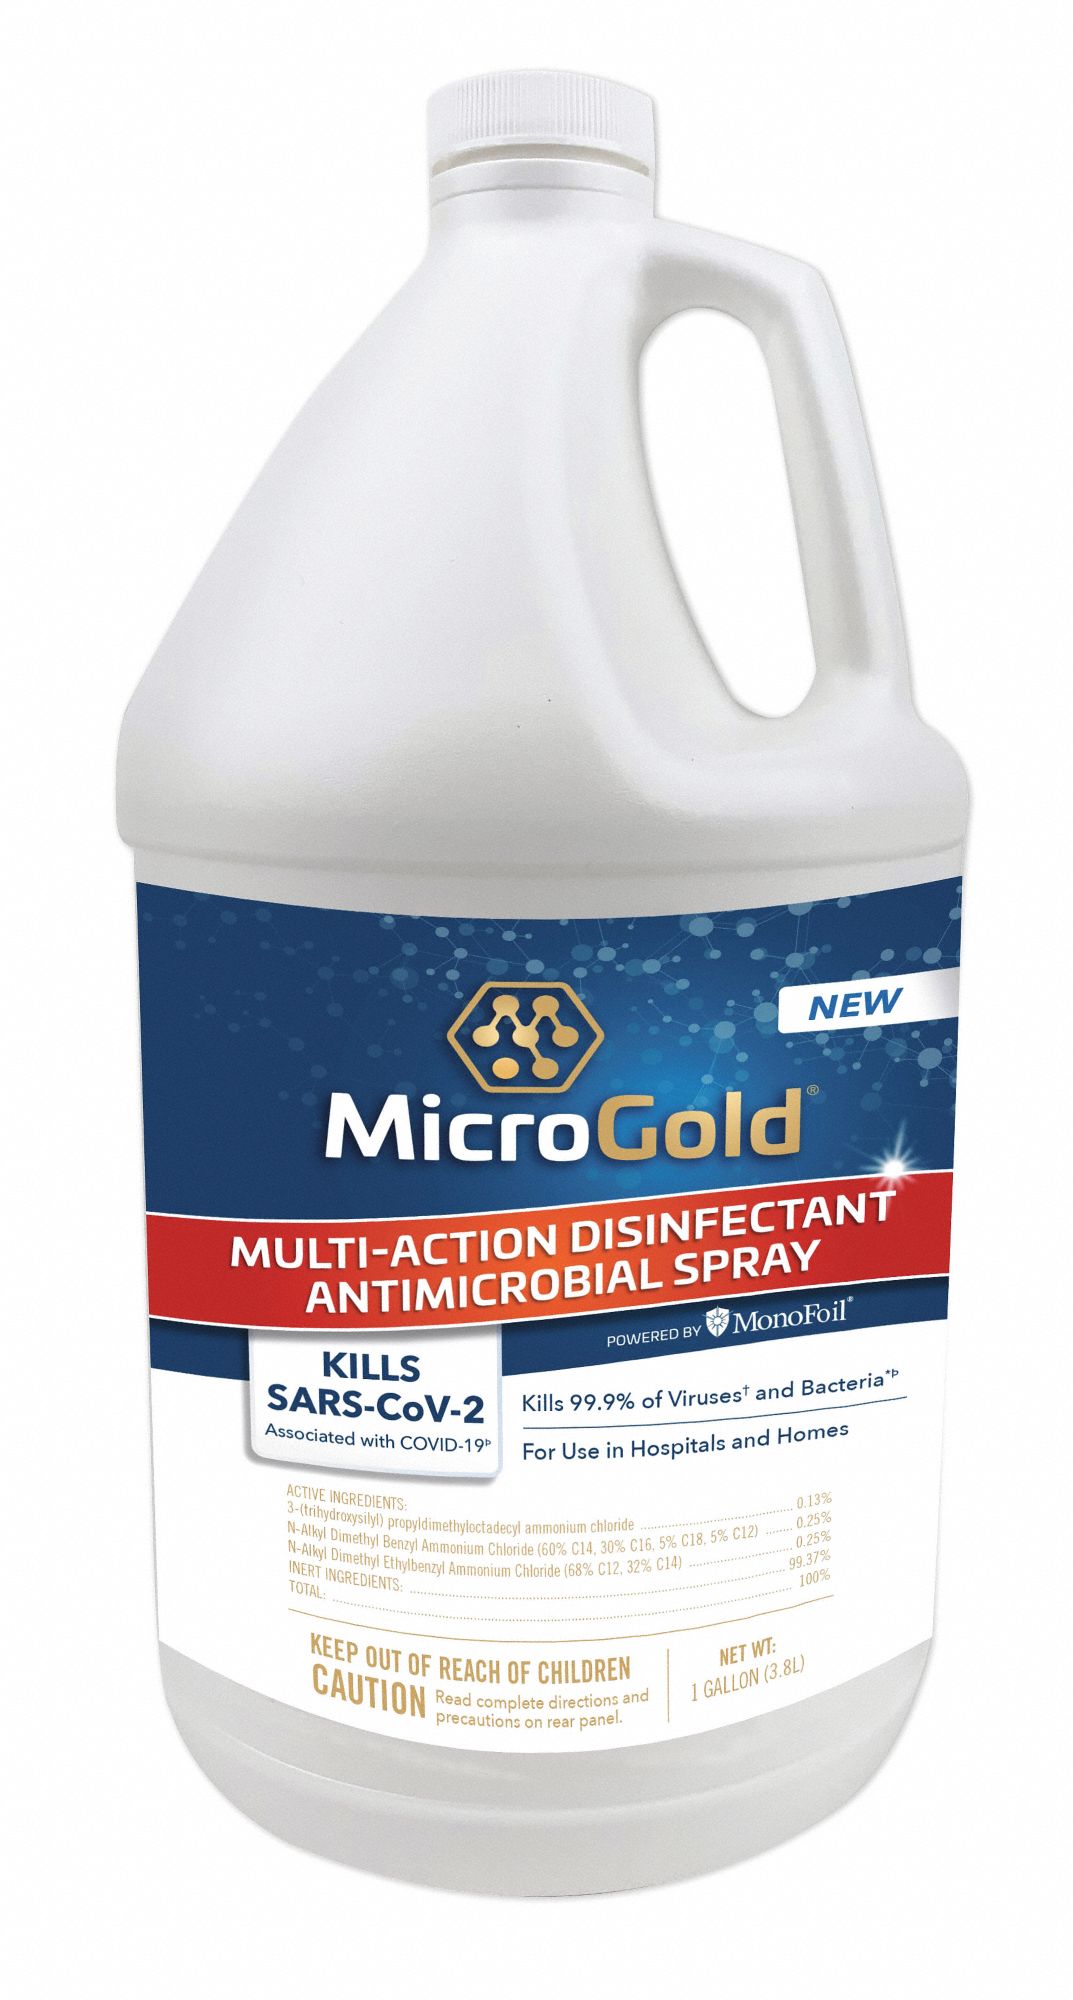 Multi-Action Disinfectant Antimicrobial Spray: Bottle, 1 gal Container Size, Liquid, 4 PK